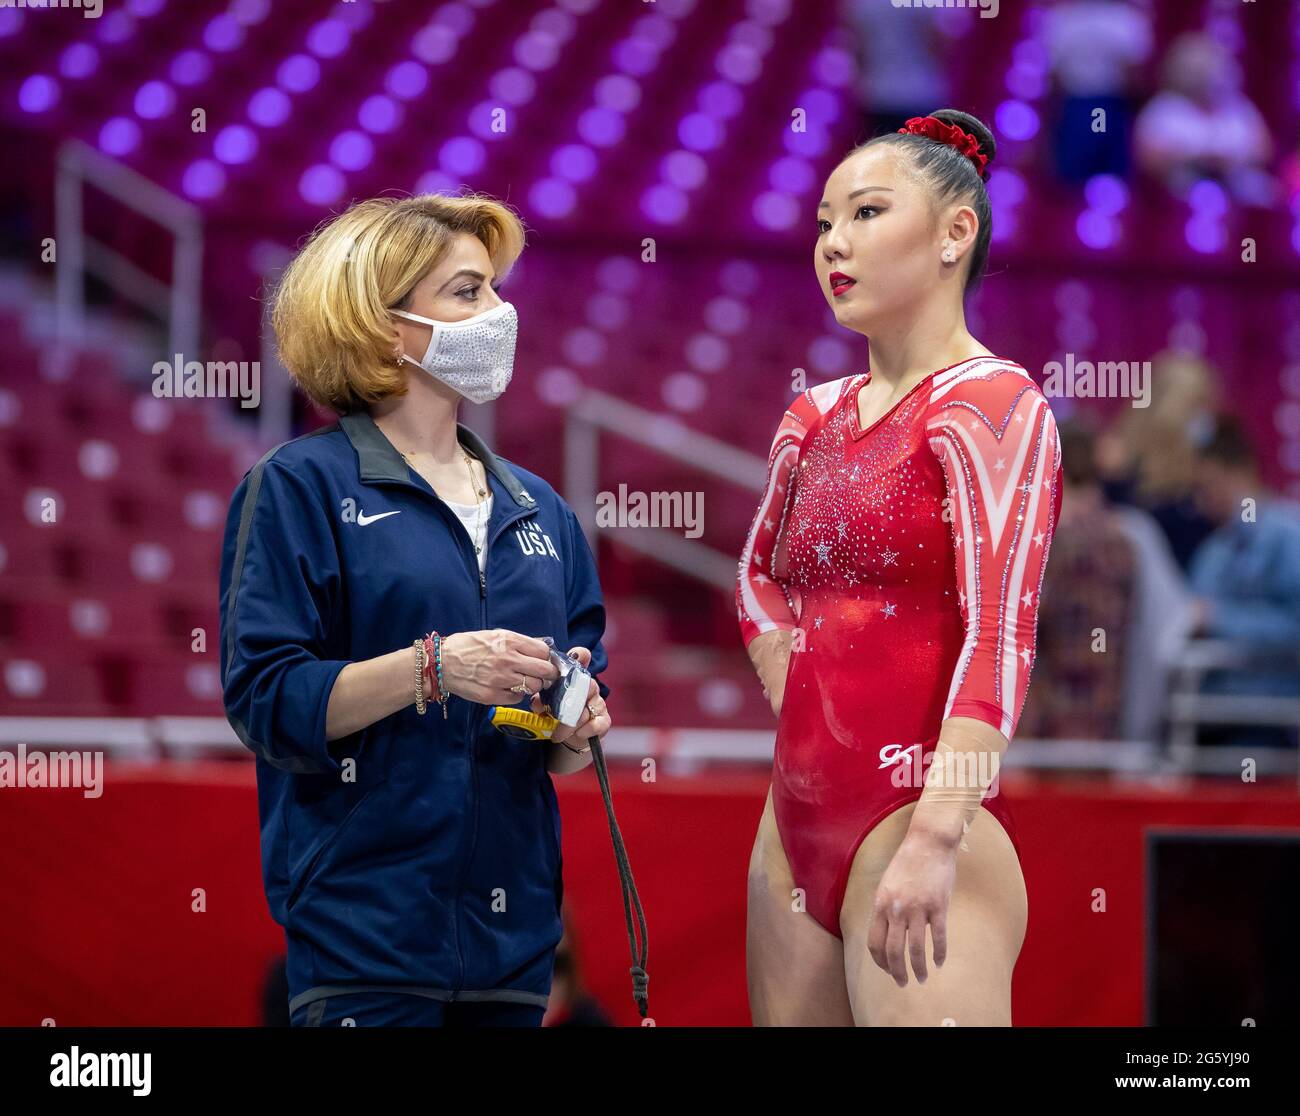 June 25, 2021: Kara Eaker converses with her coach, Armine Barutyan, during warmups for Day 1 of the 2021 U.S. Women's Gymnastics Olympic Team Trials at the Dome at America's Center in St. Louis, MO. Kyle Okita/CSM Stock Photo